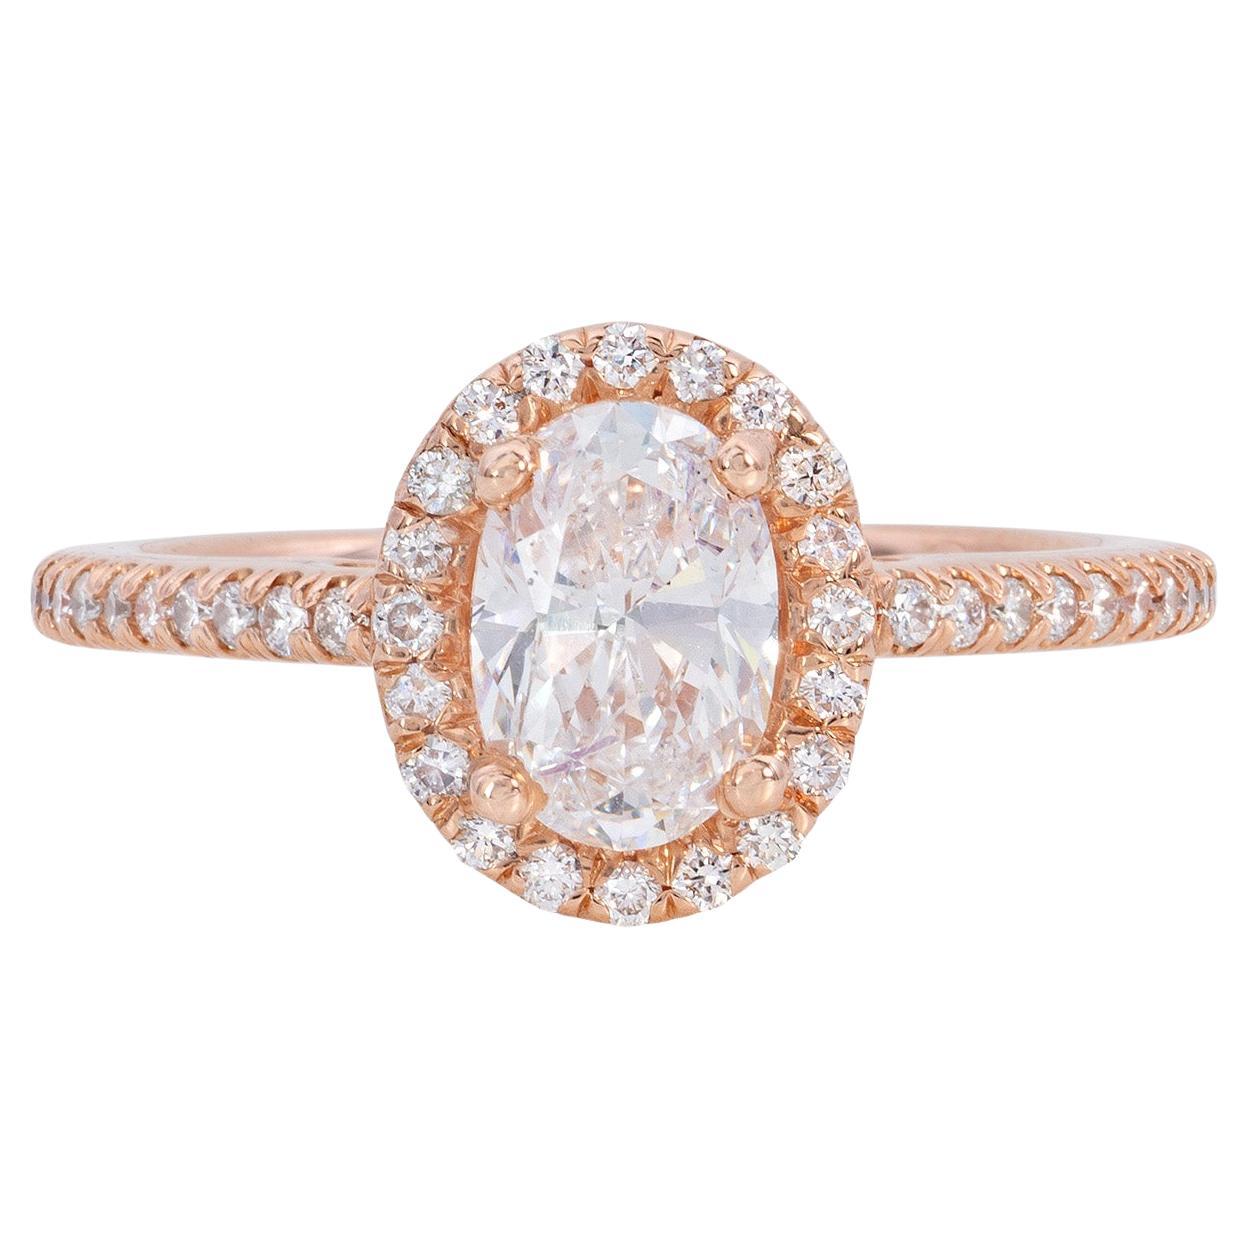 1.2 Carat Oval Diamond Halo Ring Set in Rose Gold For Sale